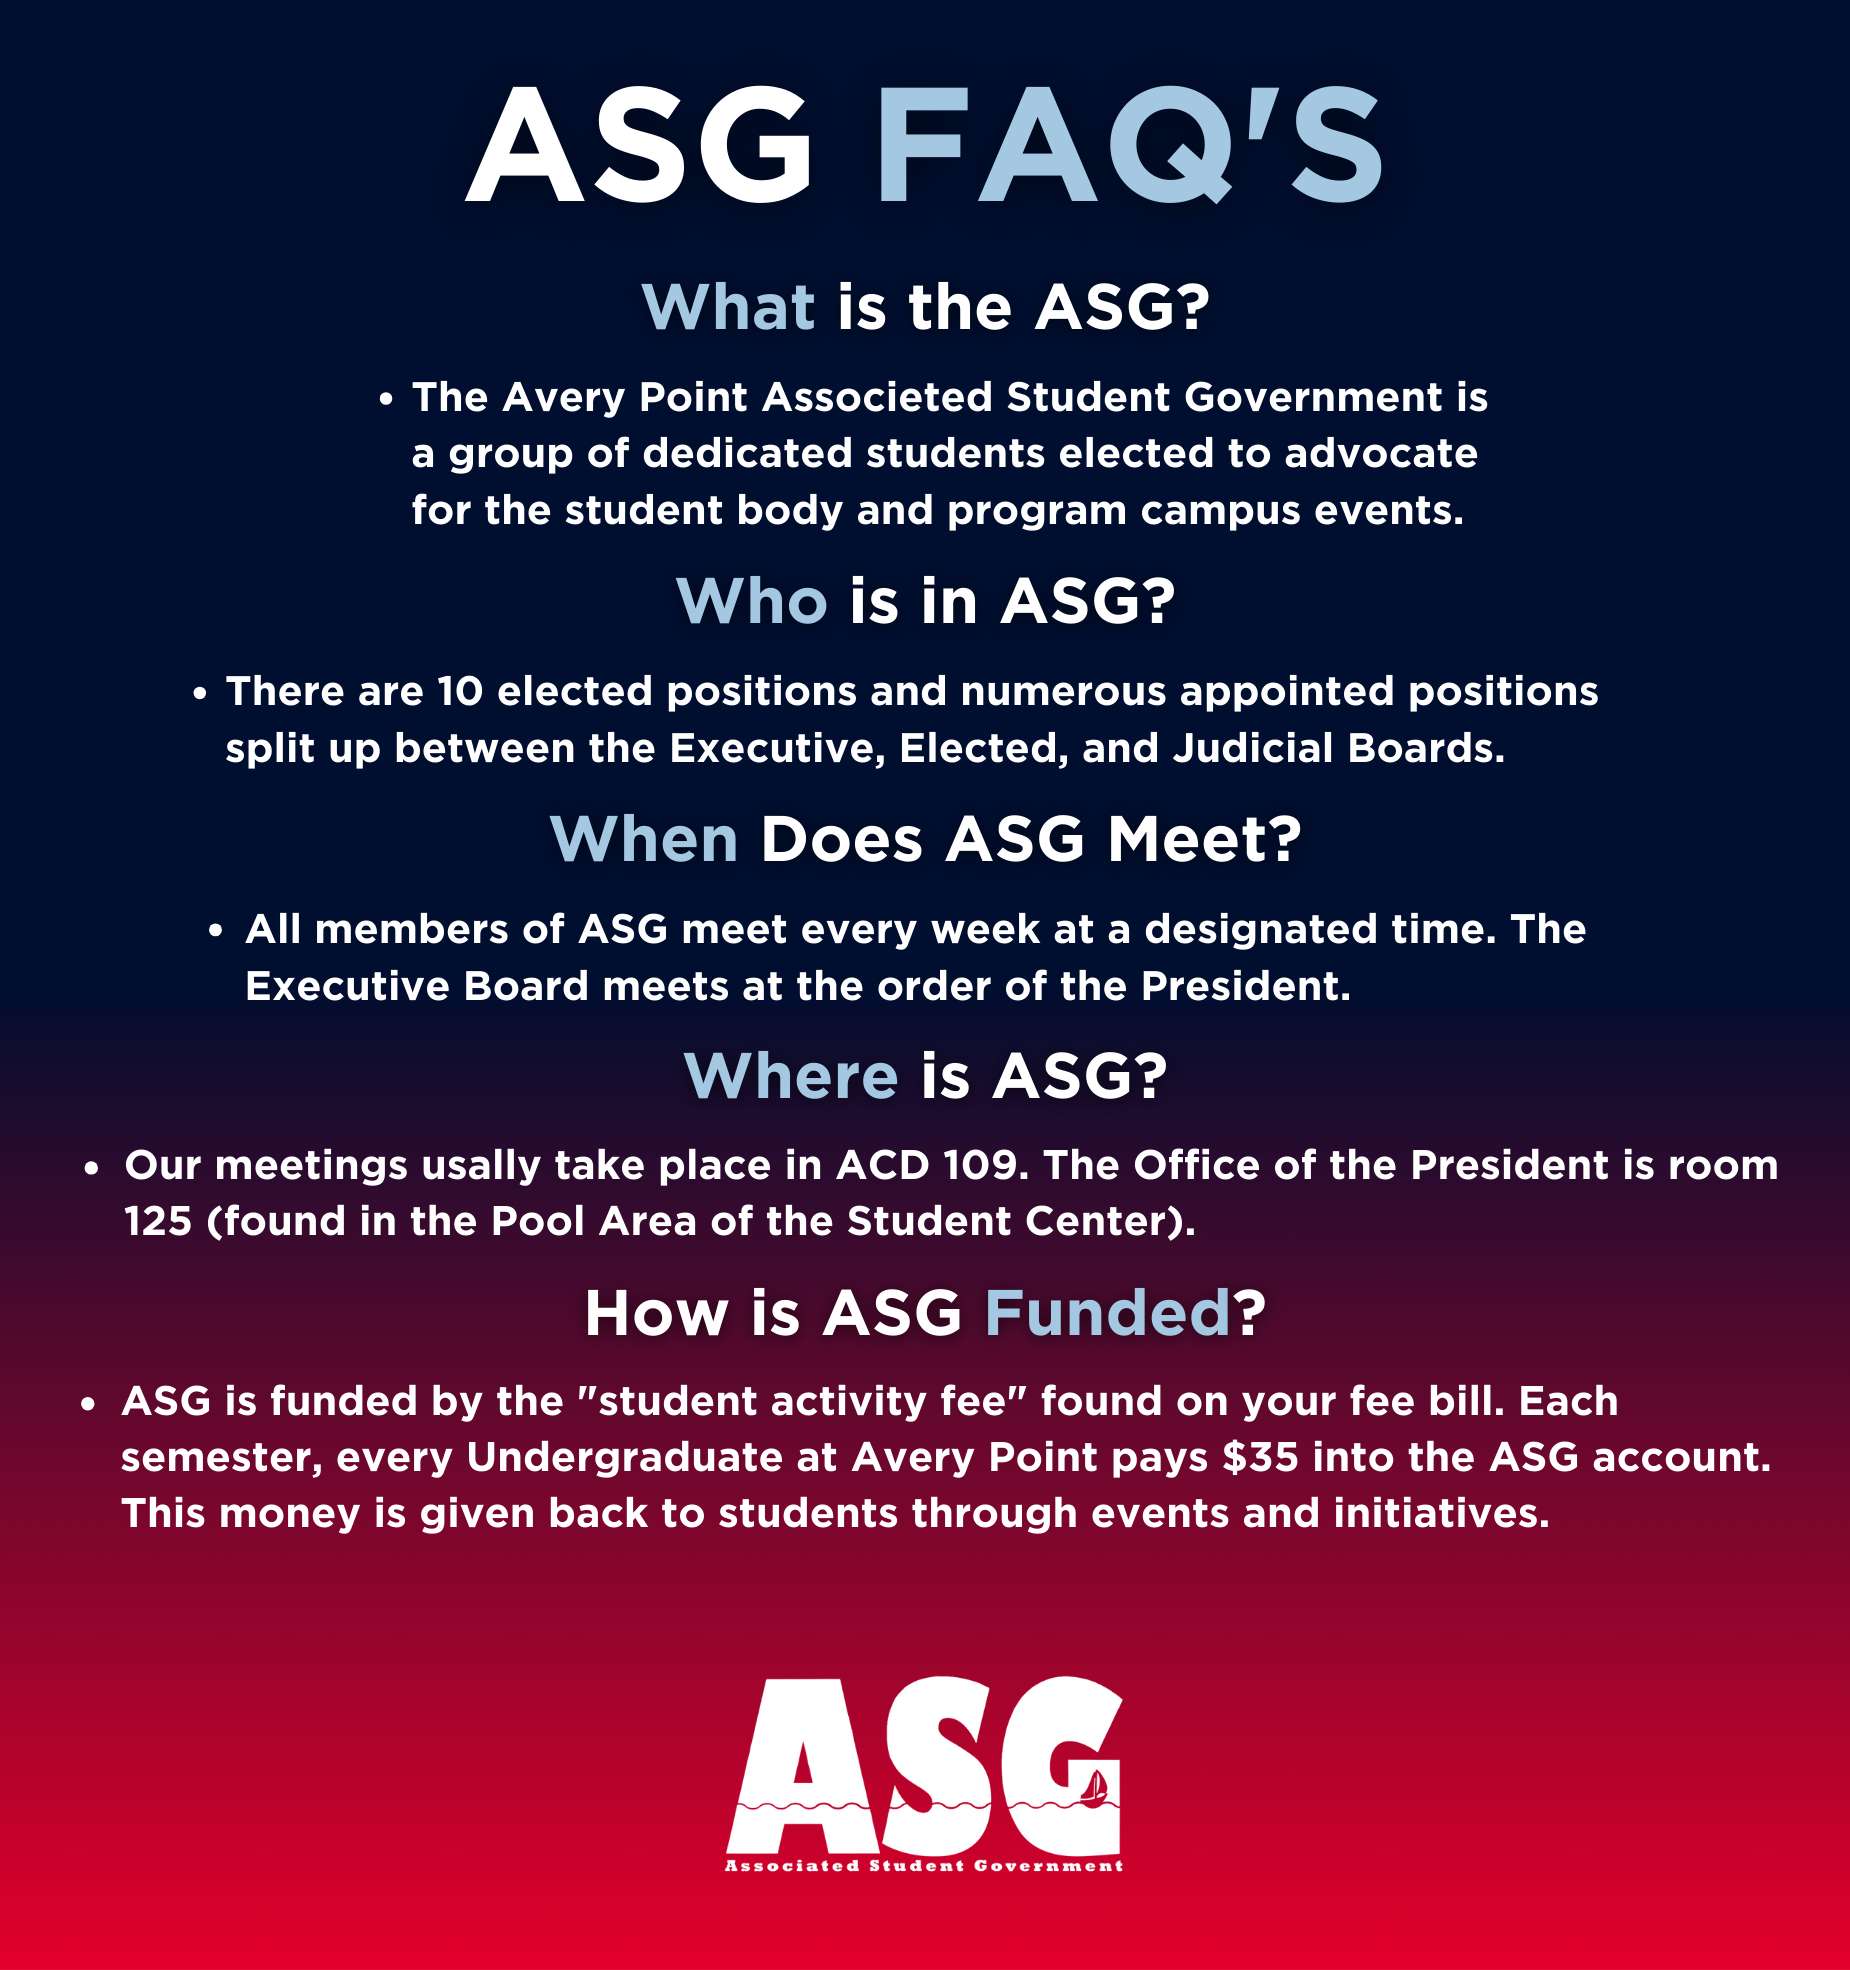 Frequently Asked Questions About the ASG